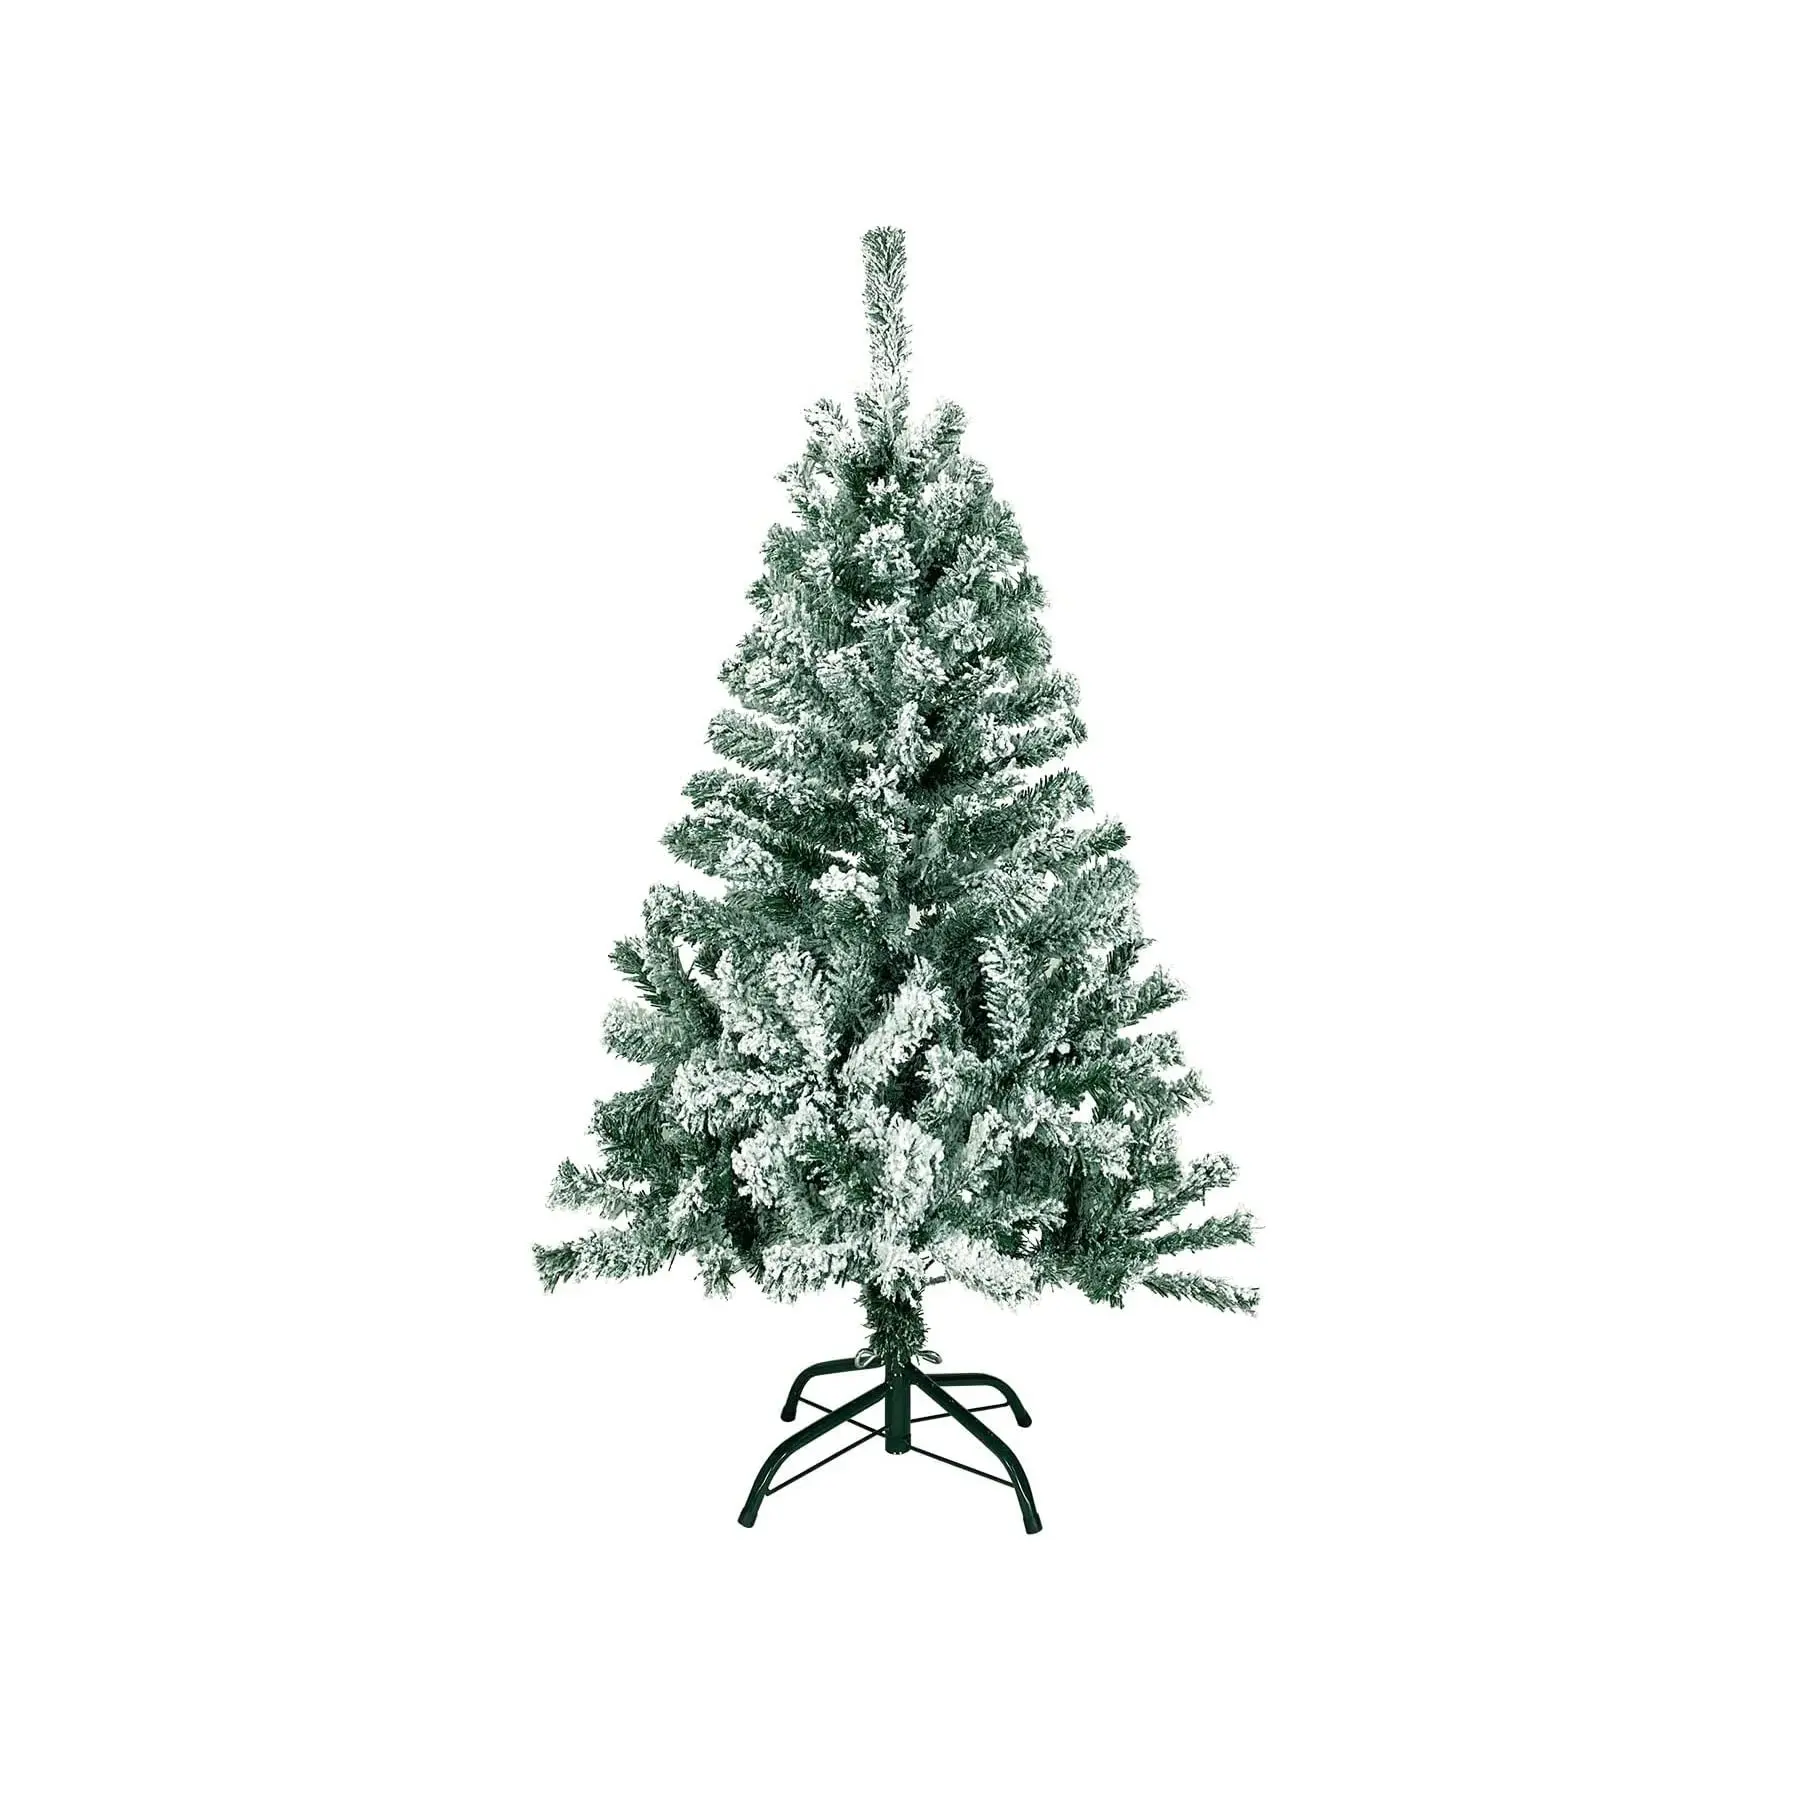 Small Artificial Flocked Snow Pine Xmas Tree With Metal Stand Decor Christmas And Other Festival Artificial Christmas Tree